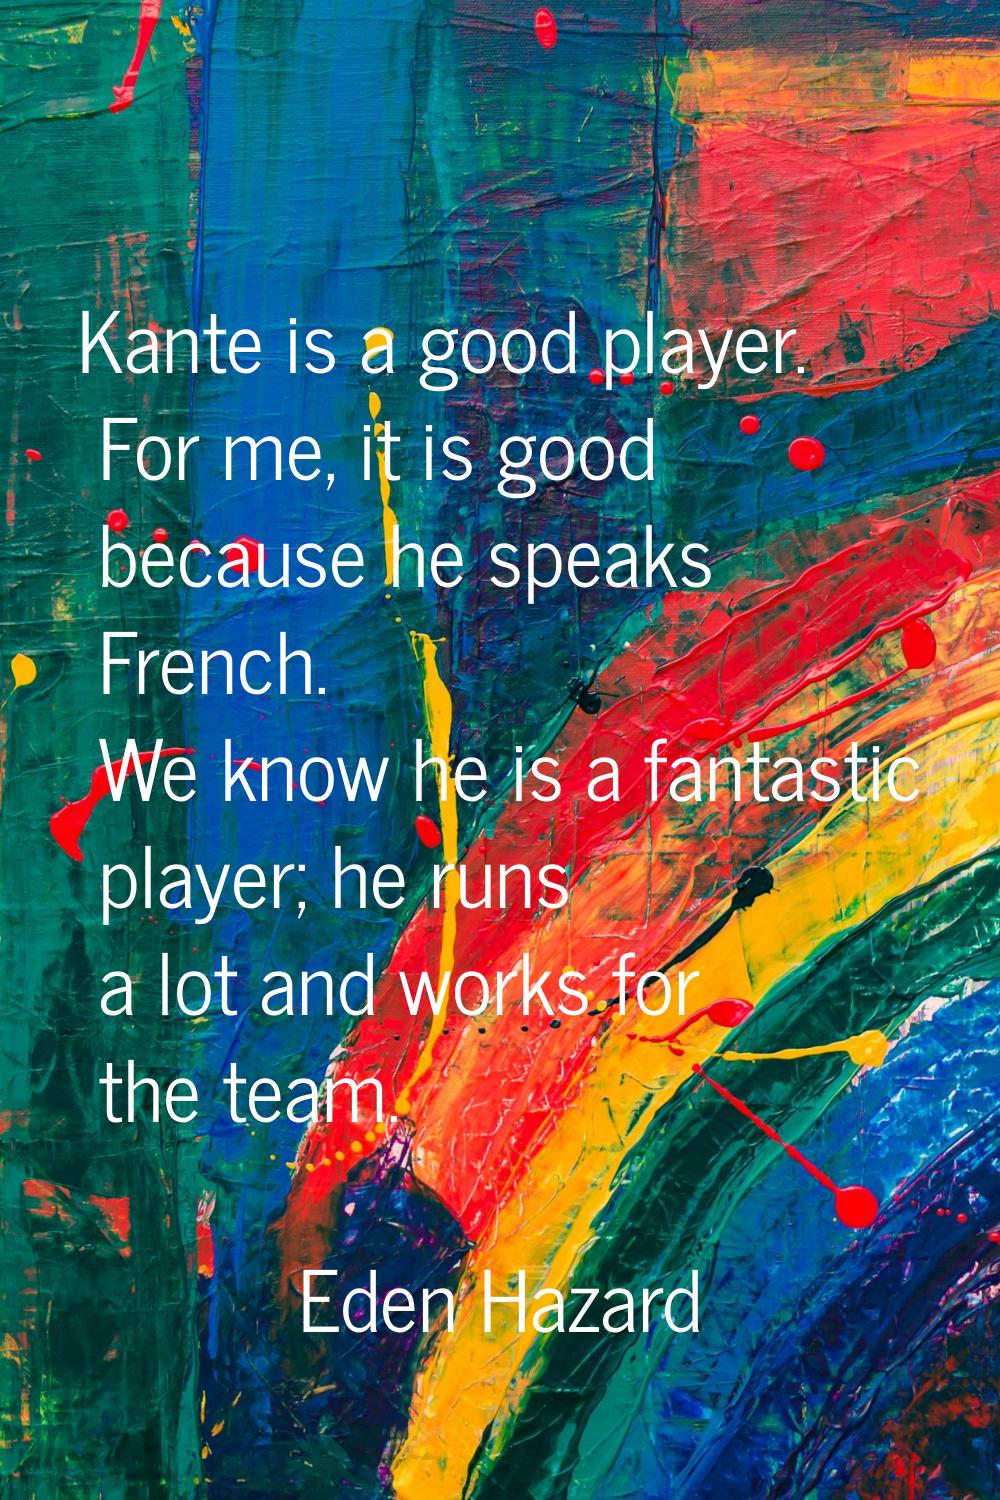 Kante is a good player. For me, it is good because he speaks French. We know he is a fantastic play